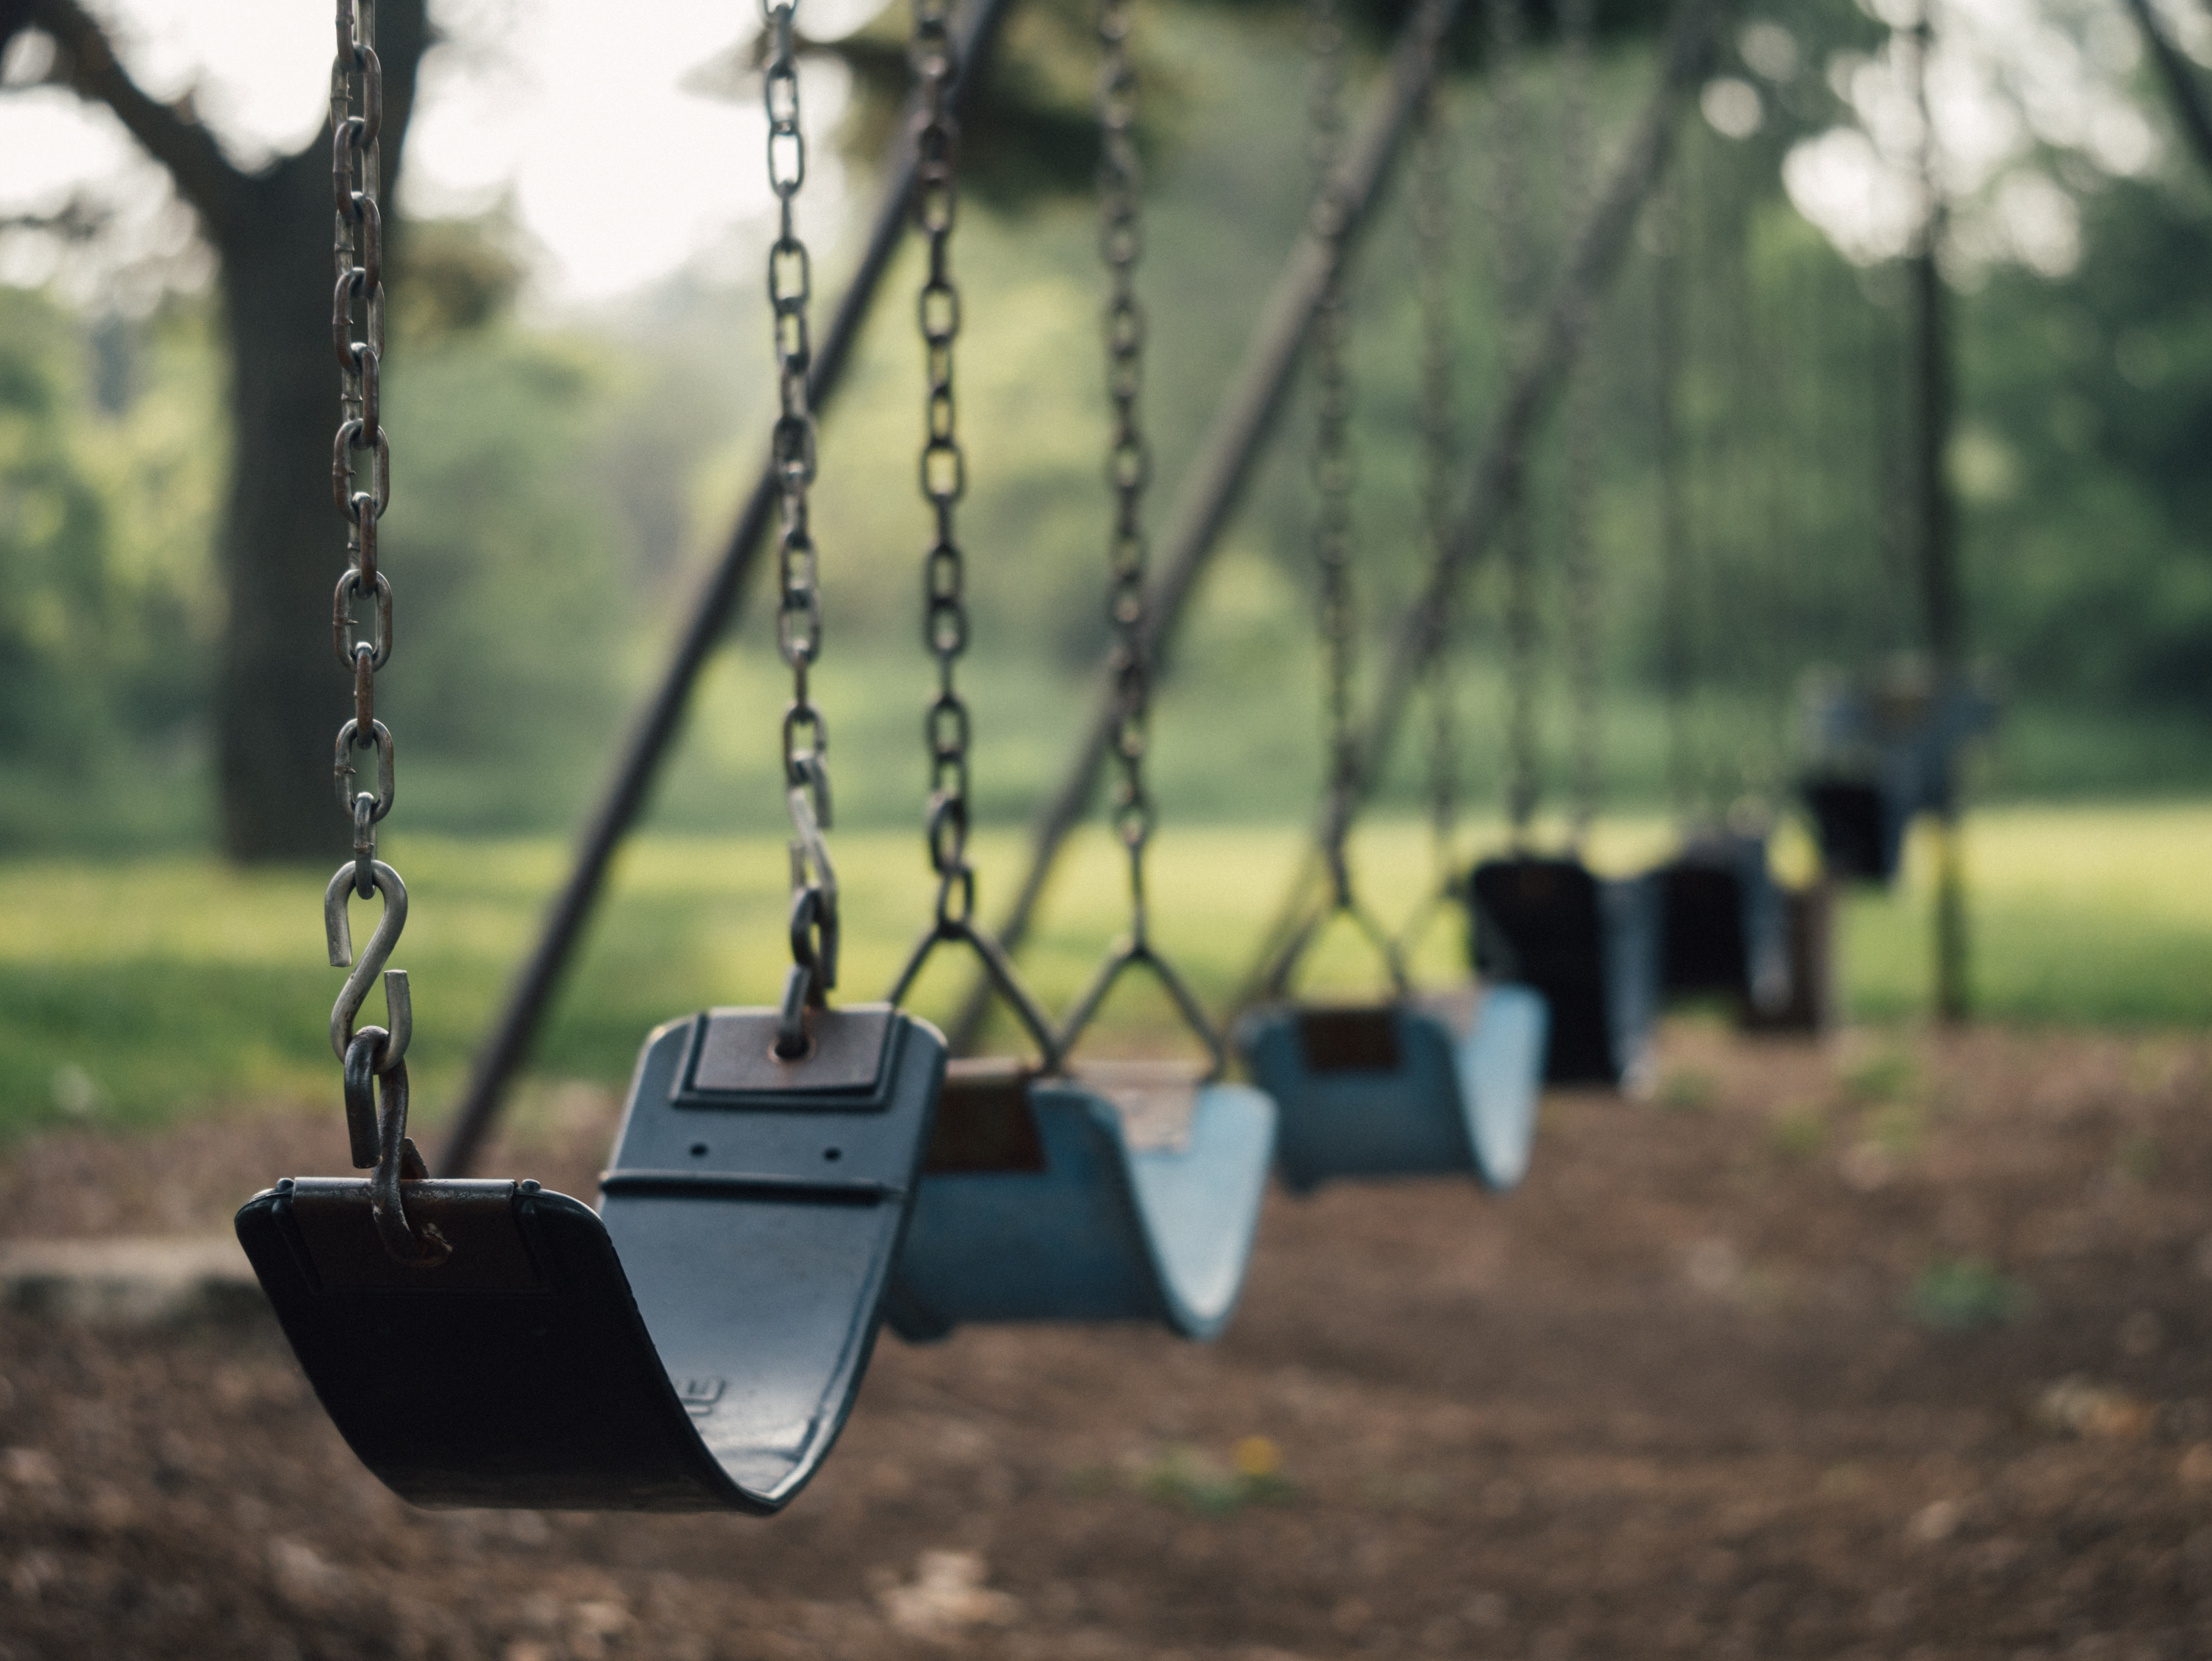 Avoiding Injury on the Playground – What Parents need to know